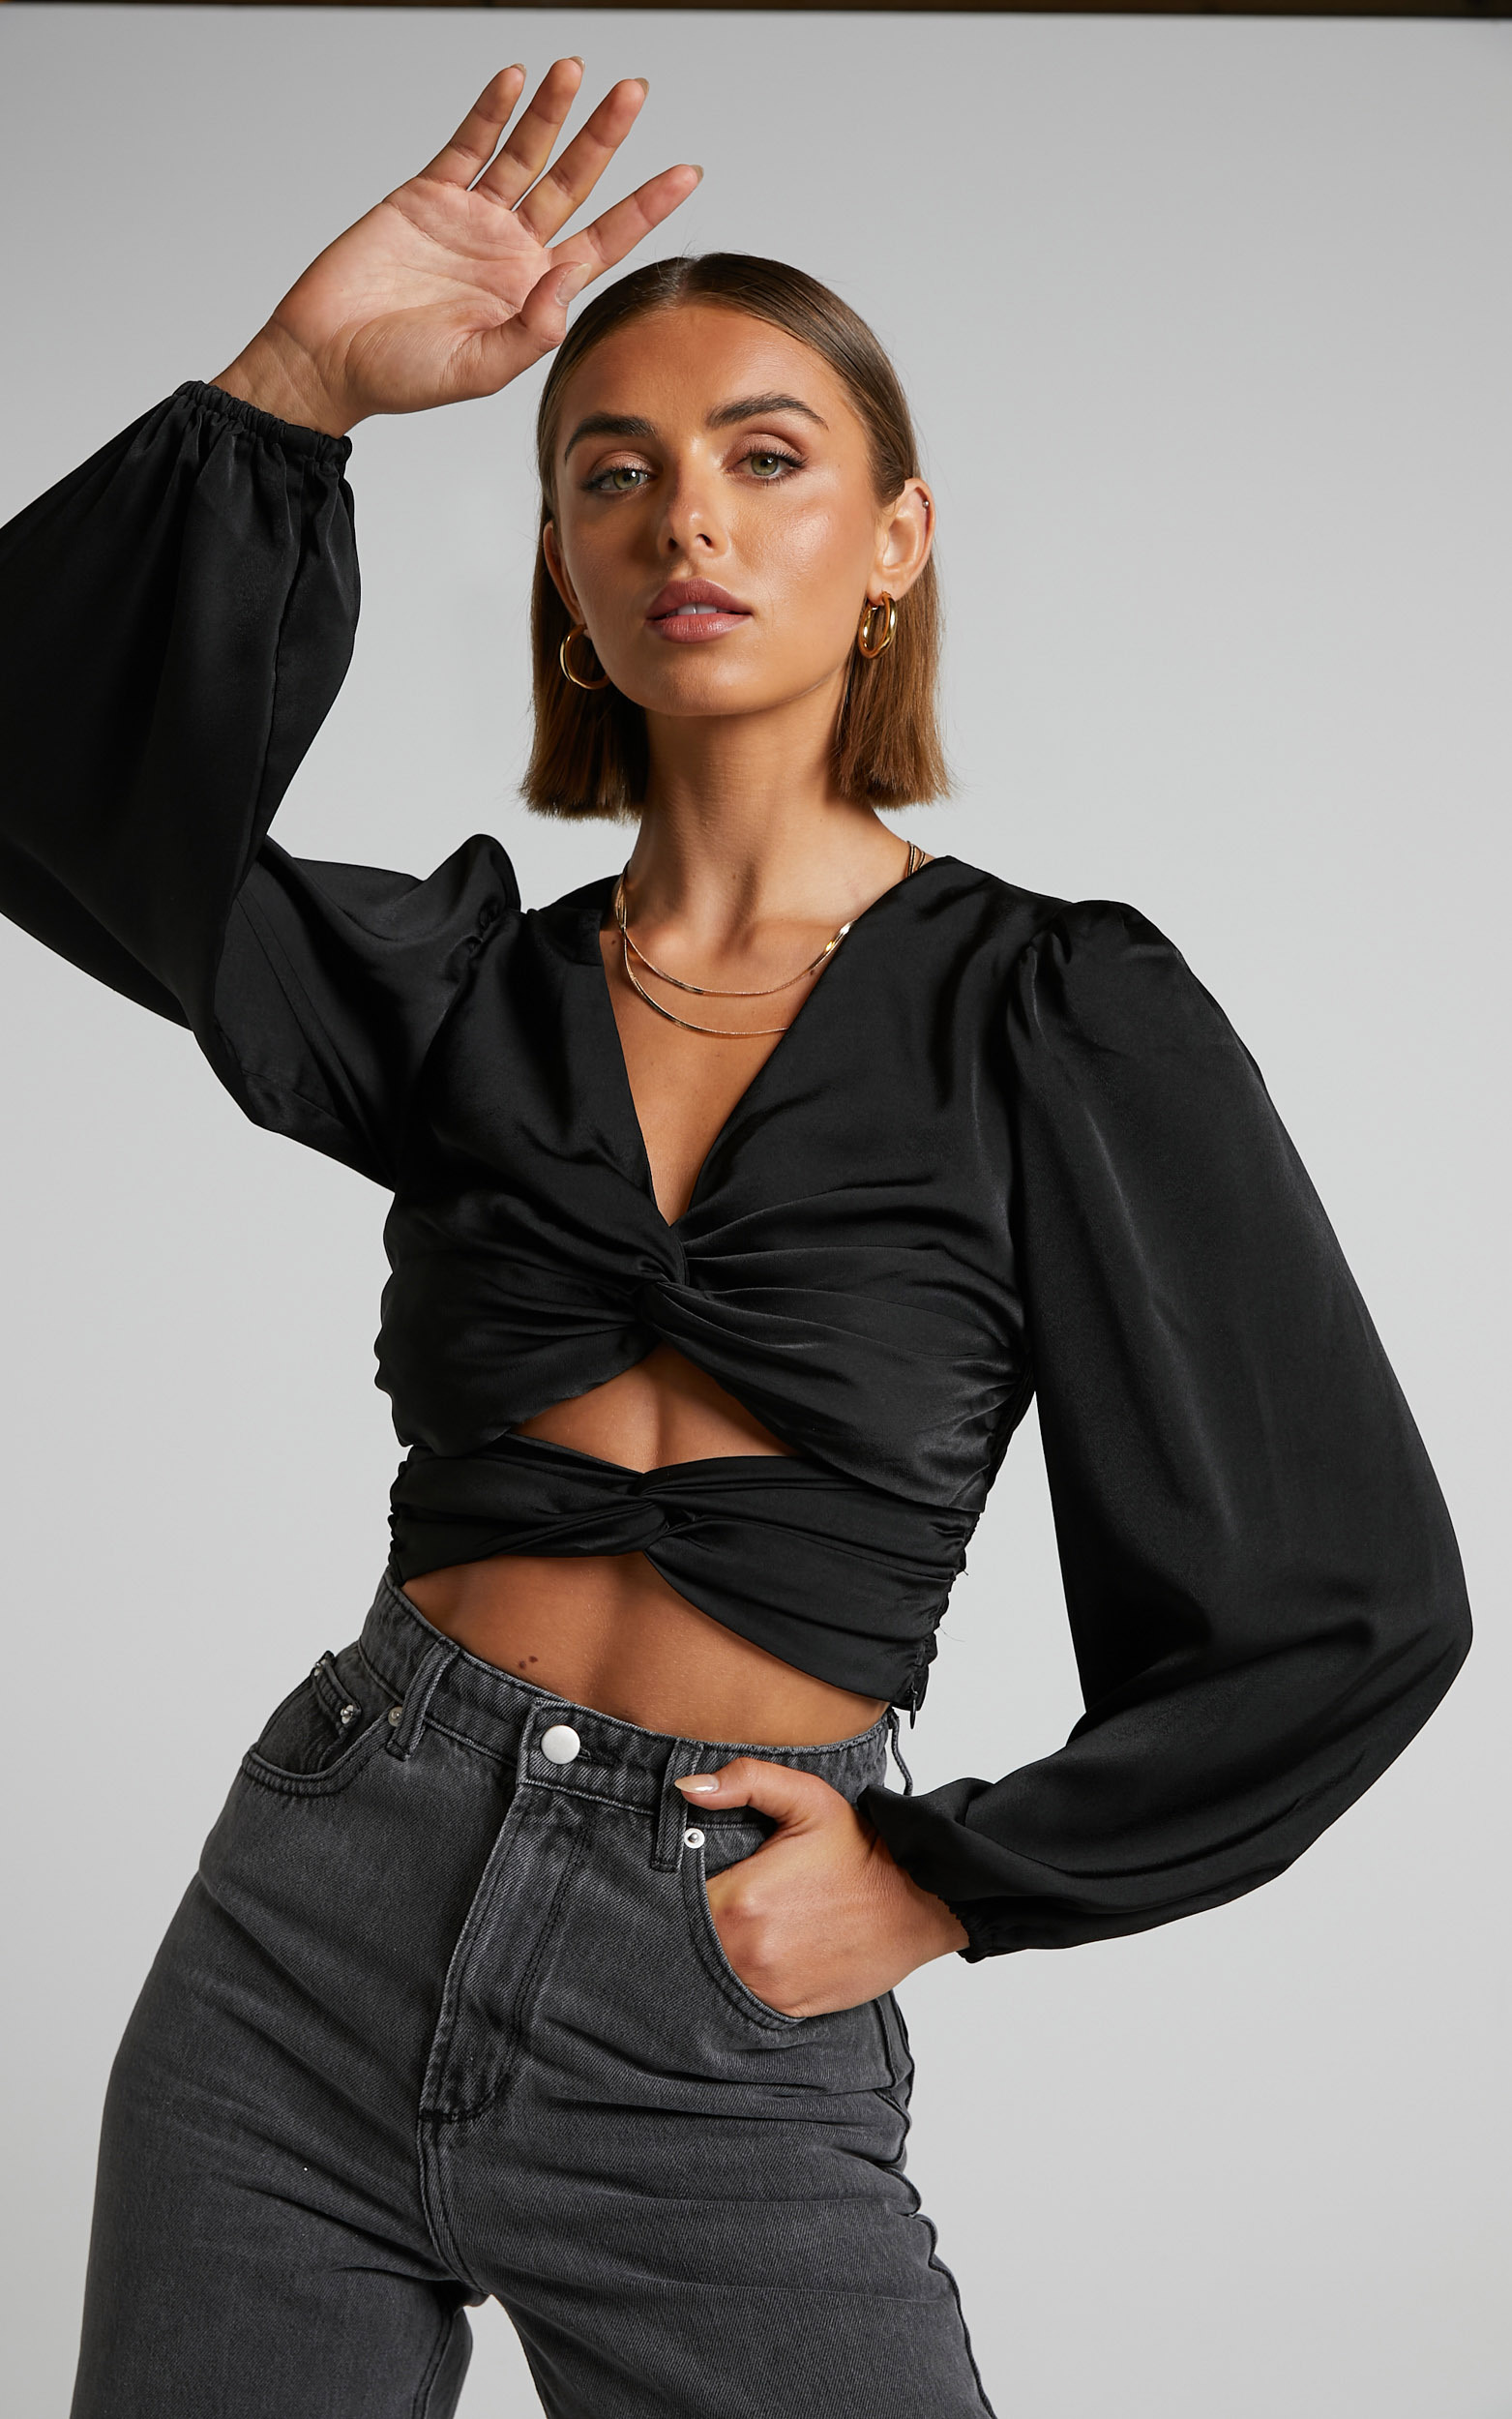 Ransley Top - Cut Out Twist Front Long Sleeve Blouse in Black - 06, BLK1, hi-res image number null